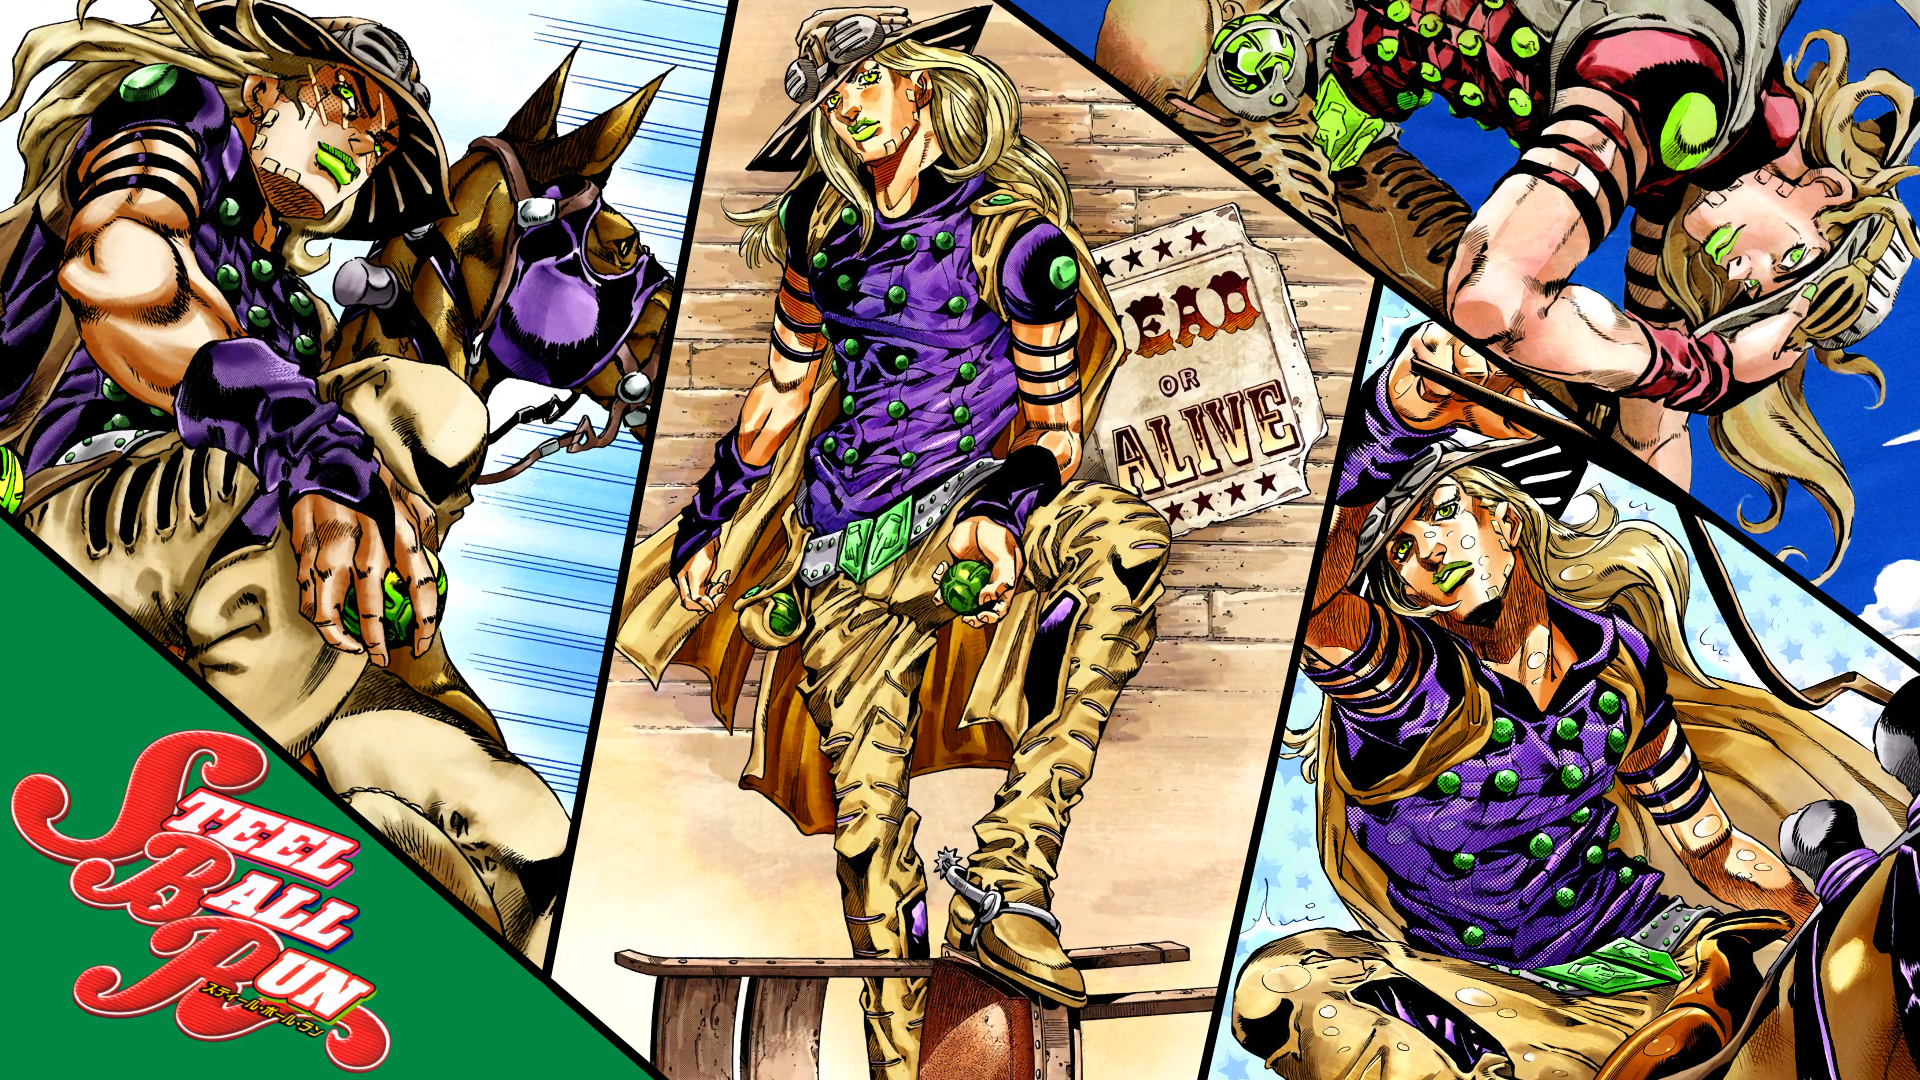 Fanart A wallpaper to commemorate recently finishing Part 7 and *my* favourite character in all of JoJo: Gyro Zeppeli